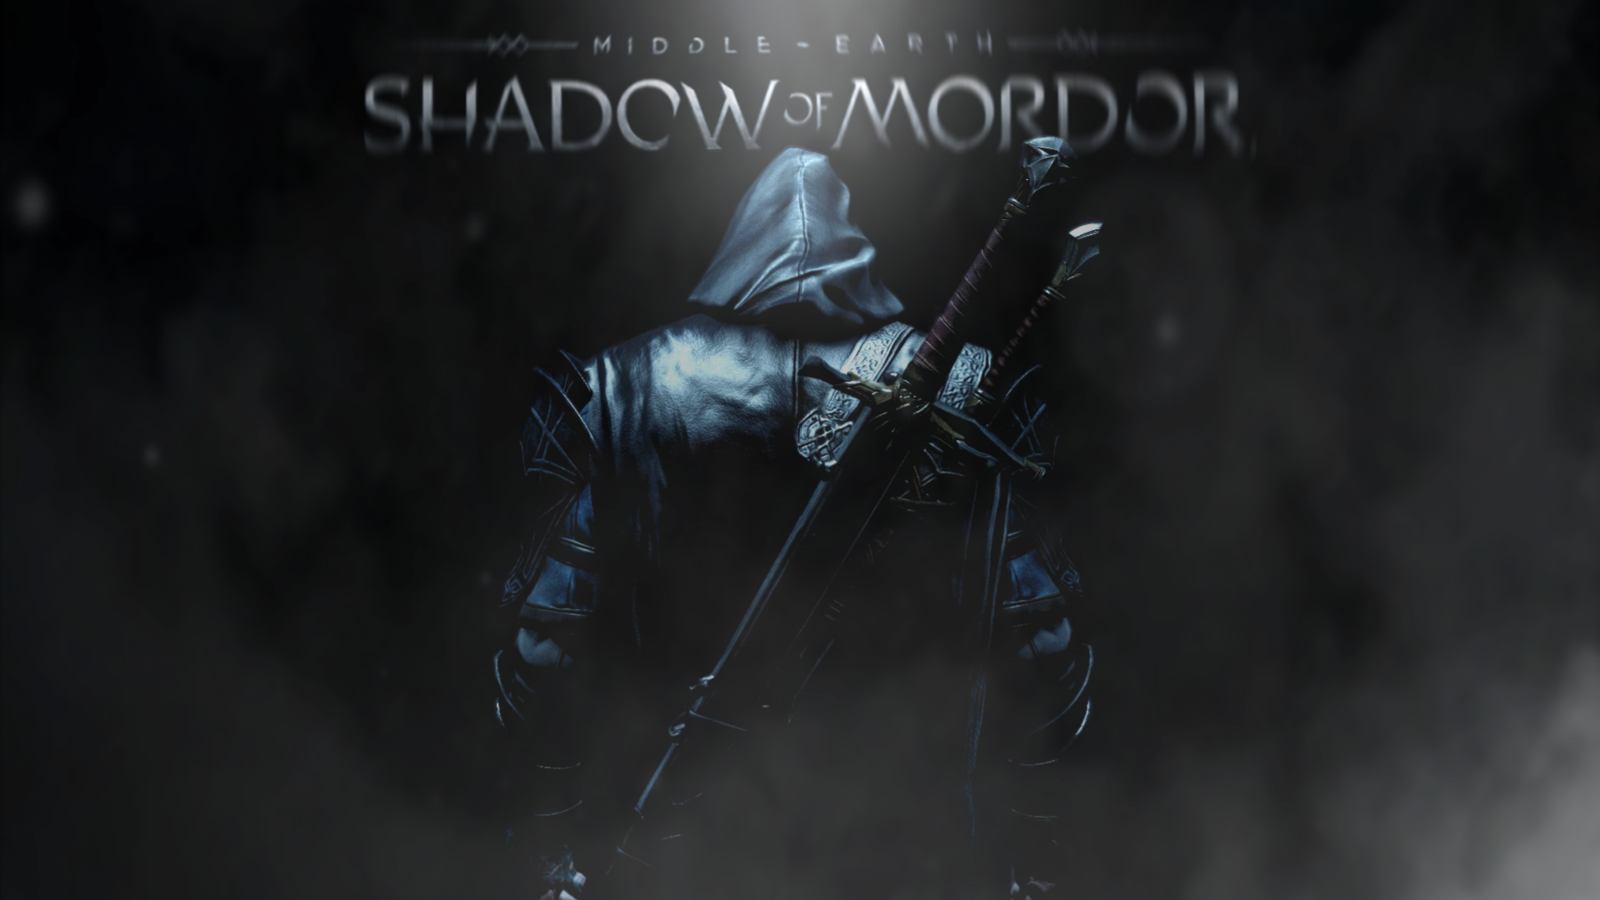 Middle Earth Shadow of Mordor Wallpaper HD by